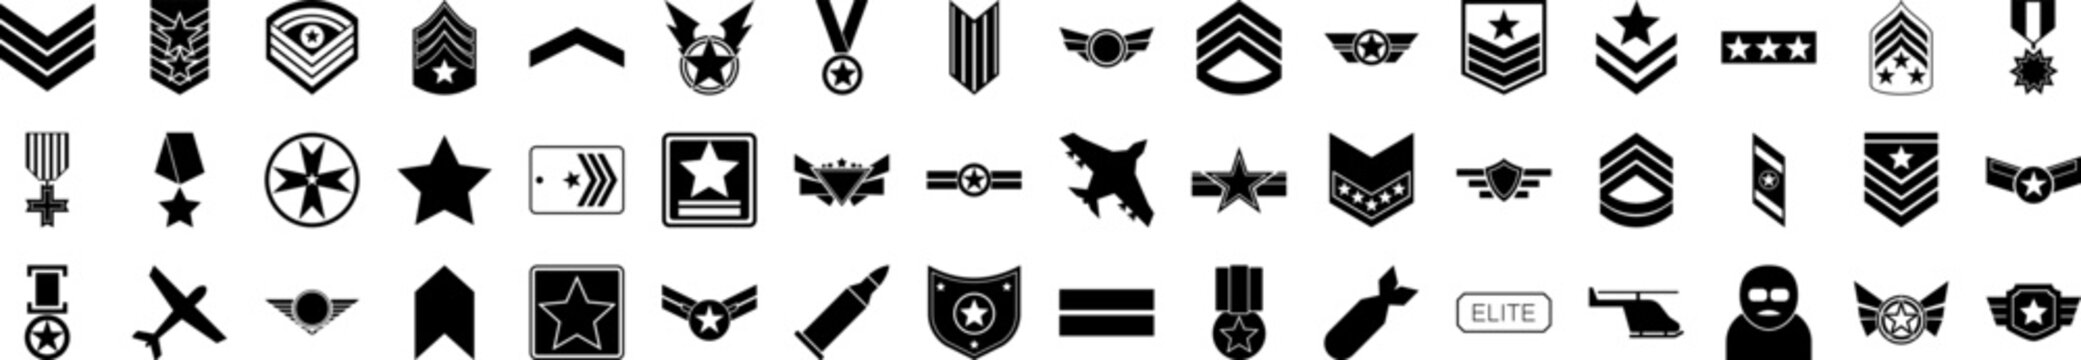 Army icons collection vector illustration design